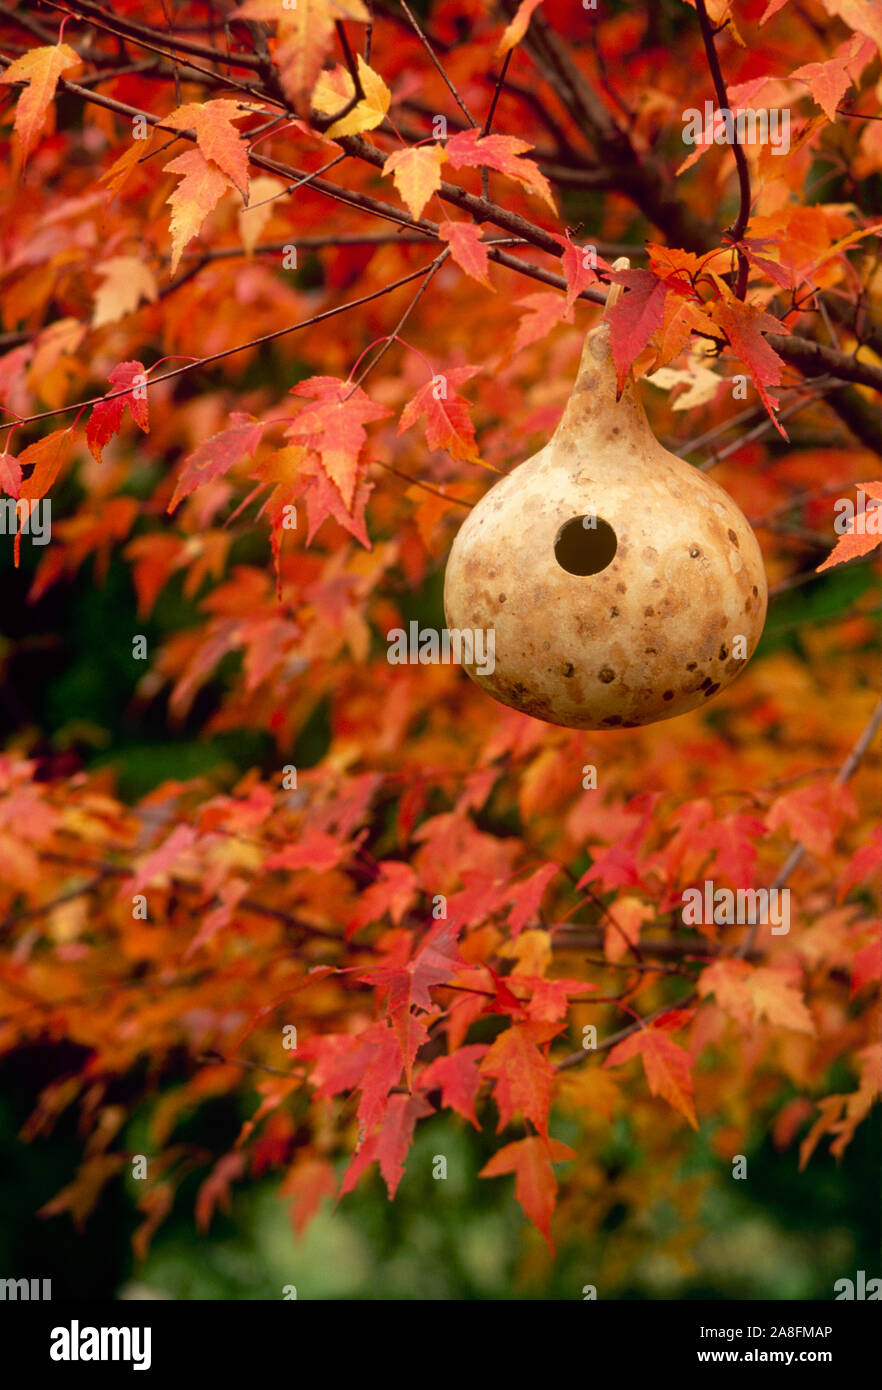 Natural gourd hollowed out for birdhouse hanging in a garden among gold-orange vivid maple tree foliage Missouri, USA Stock Photo